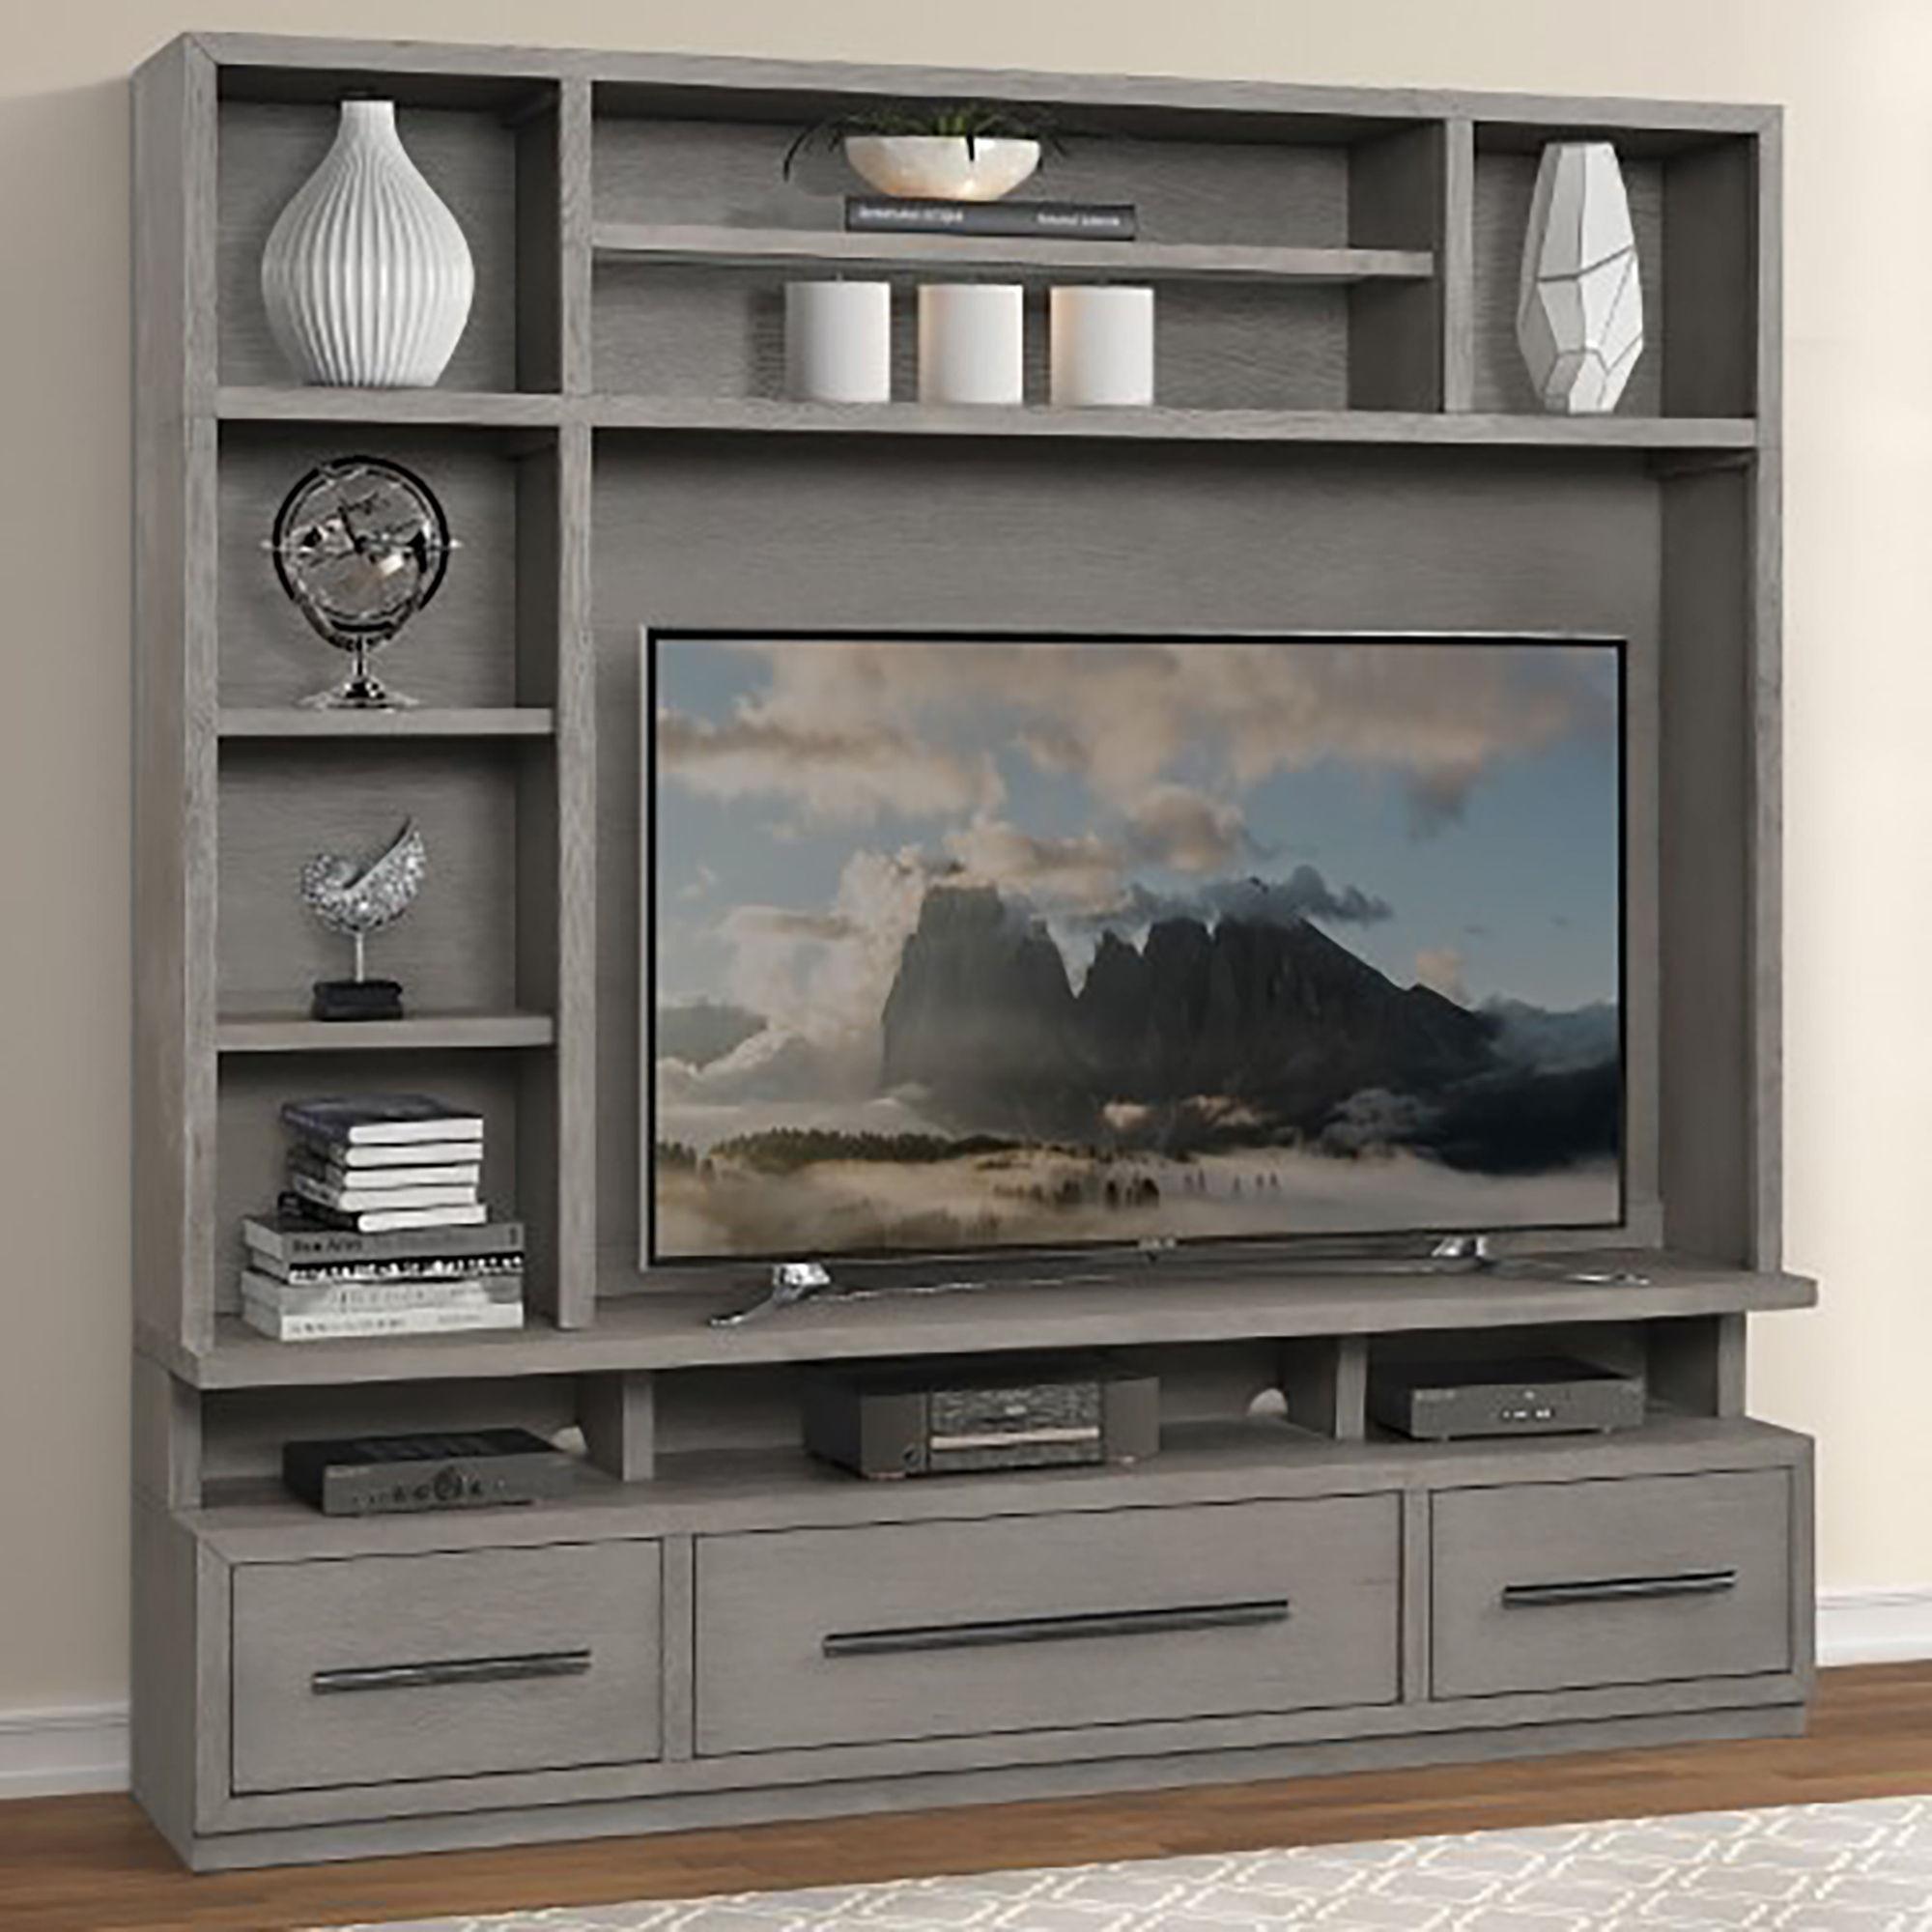 Parker House Furniture - Pure Modern - Entertainment Wall - 5th Avenue Furniture